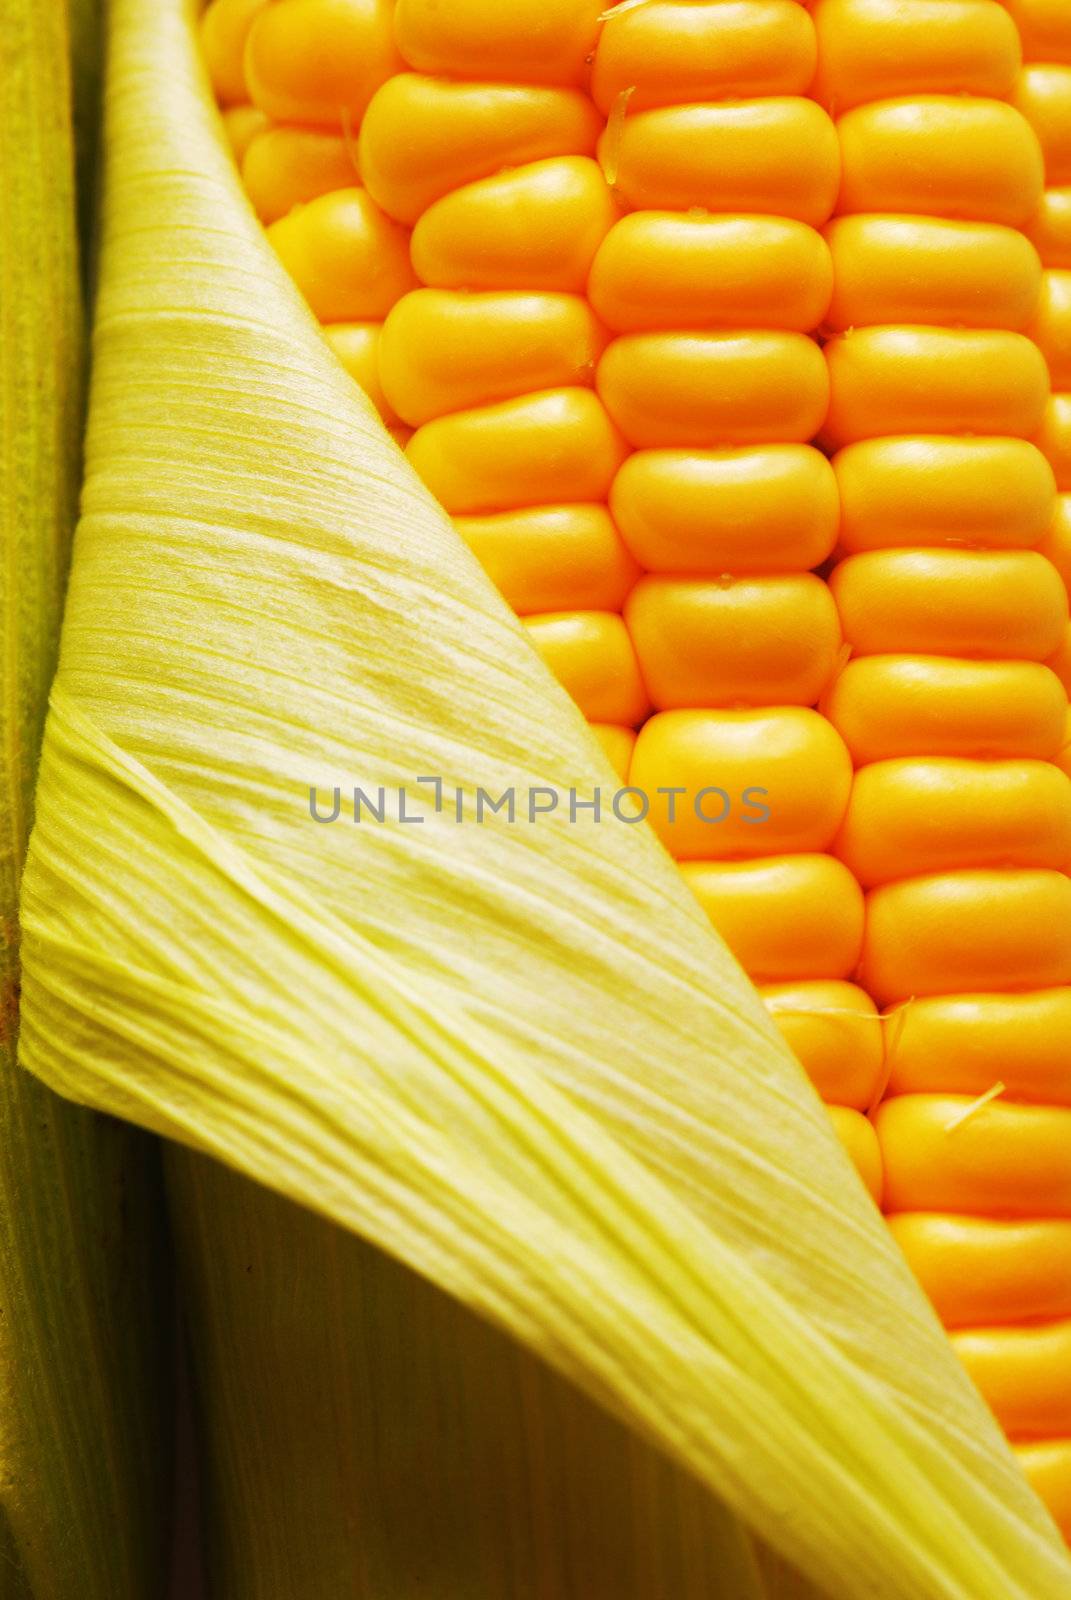 Corn by haveseen